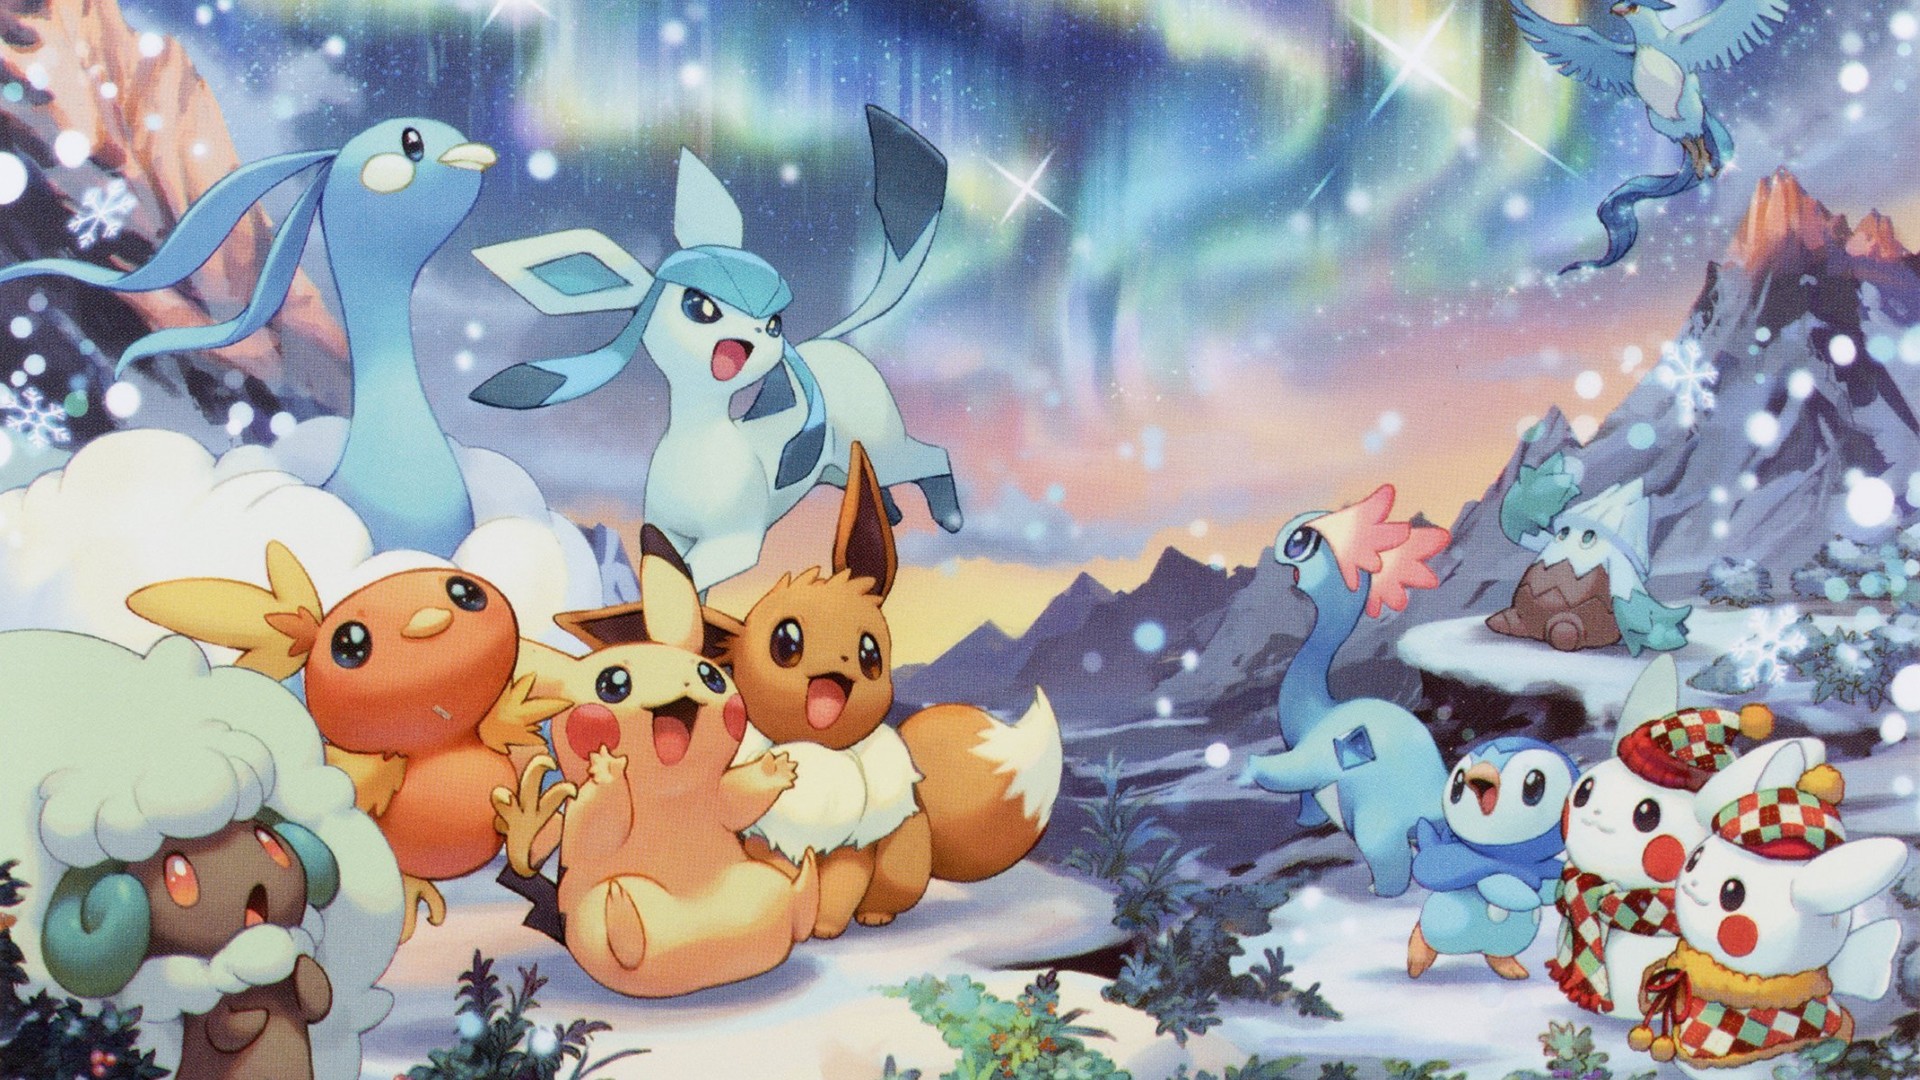 HD Wallpaper Pokemon with high-resolution 1920x1080 pixel. You can use this wallpaper for your Desktop Computer Backgrounds, Mac Wallpapers, Android Lock screen or iPhone Screensavers and another smartphone device